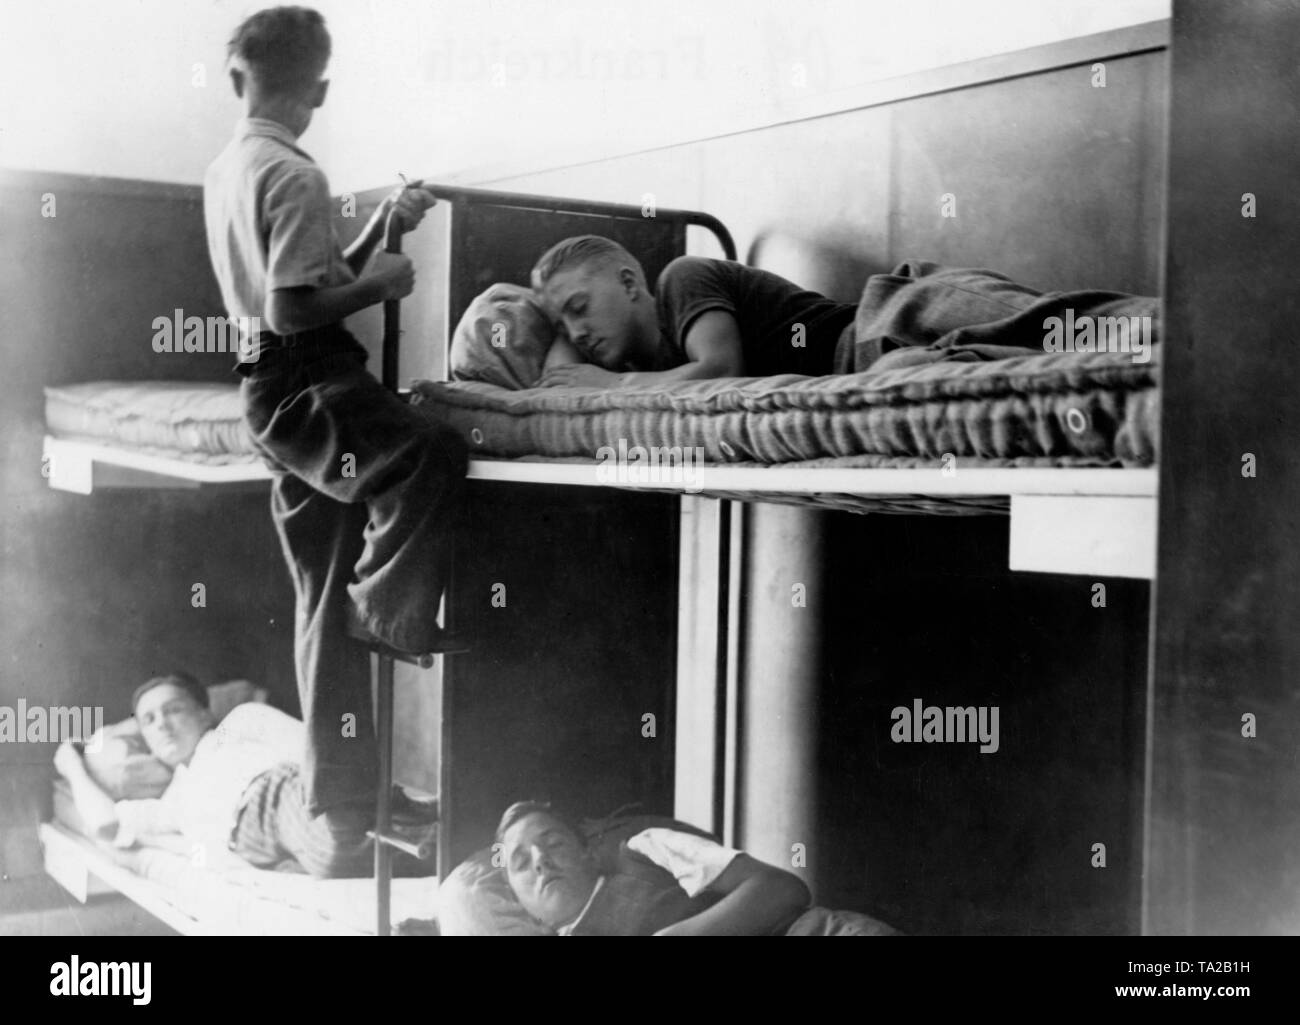 The Comite de la Jeunesse de France has set up an accommodation, which serves as a shelter for released young French prisoners of war. Young men in a bedroom. Stock Photo